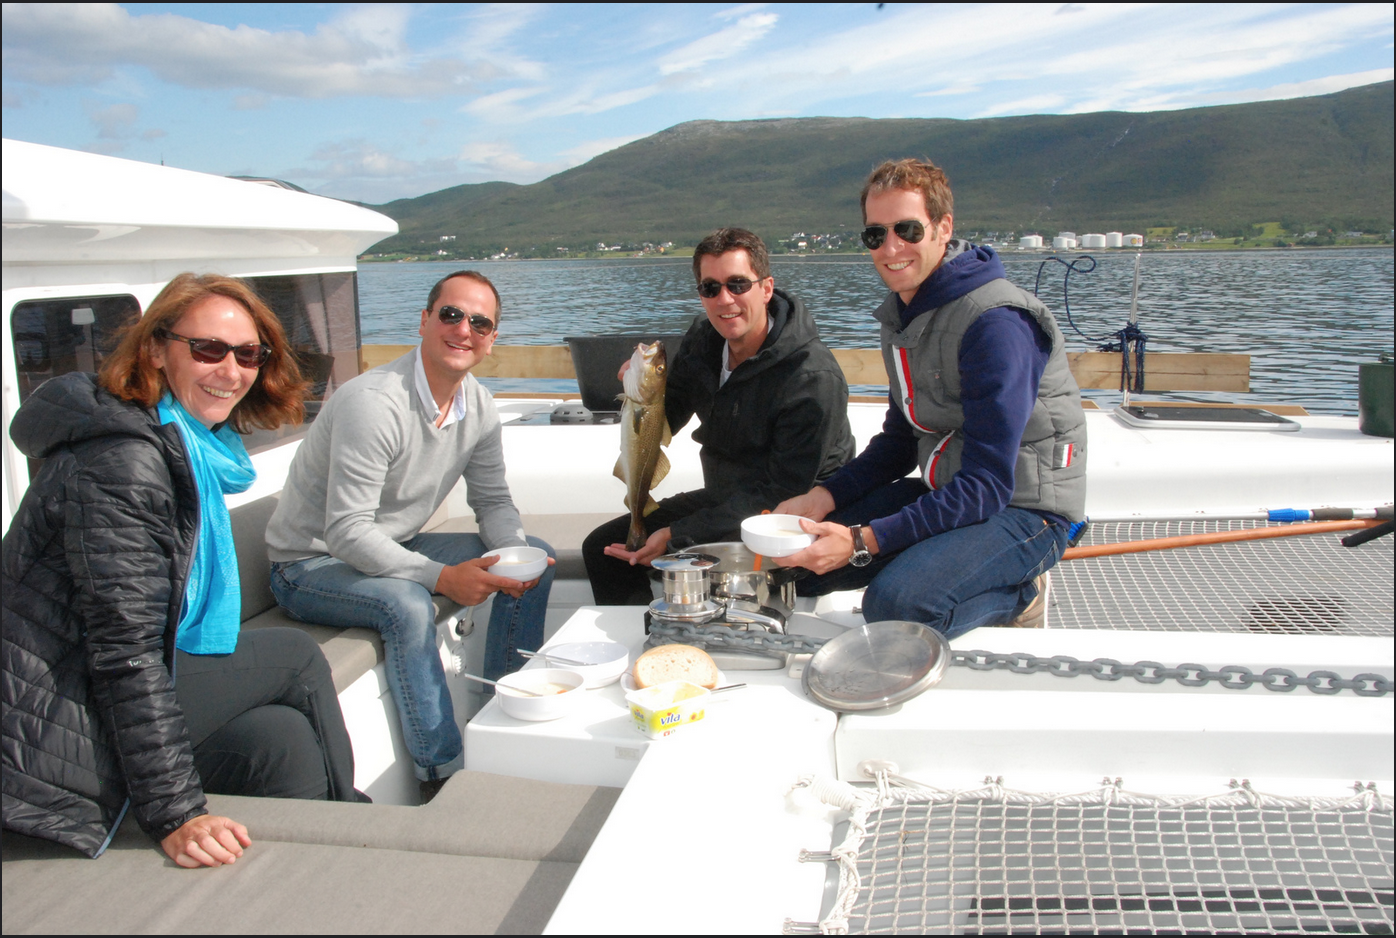 Sail and relax | #Tromsoe | #Fishing |Dinner